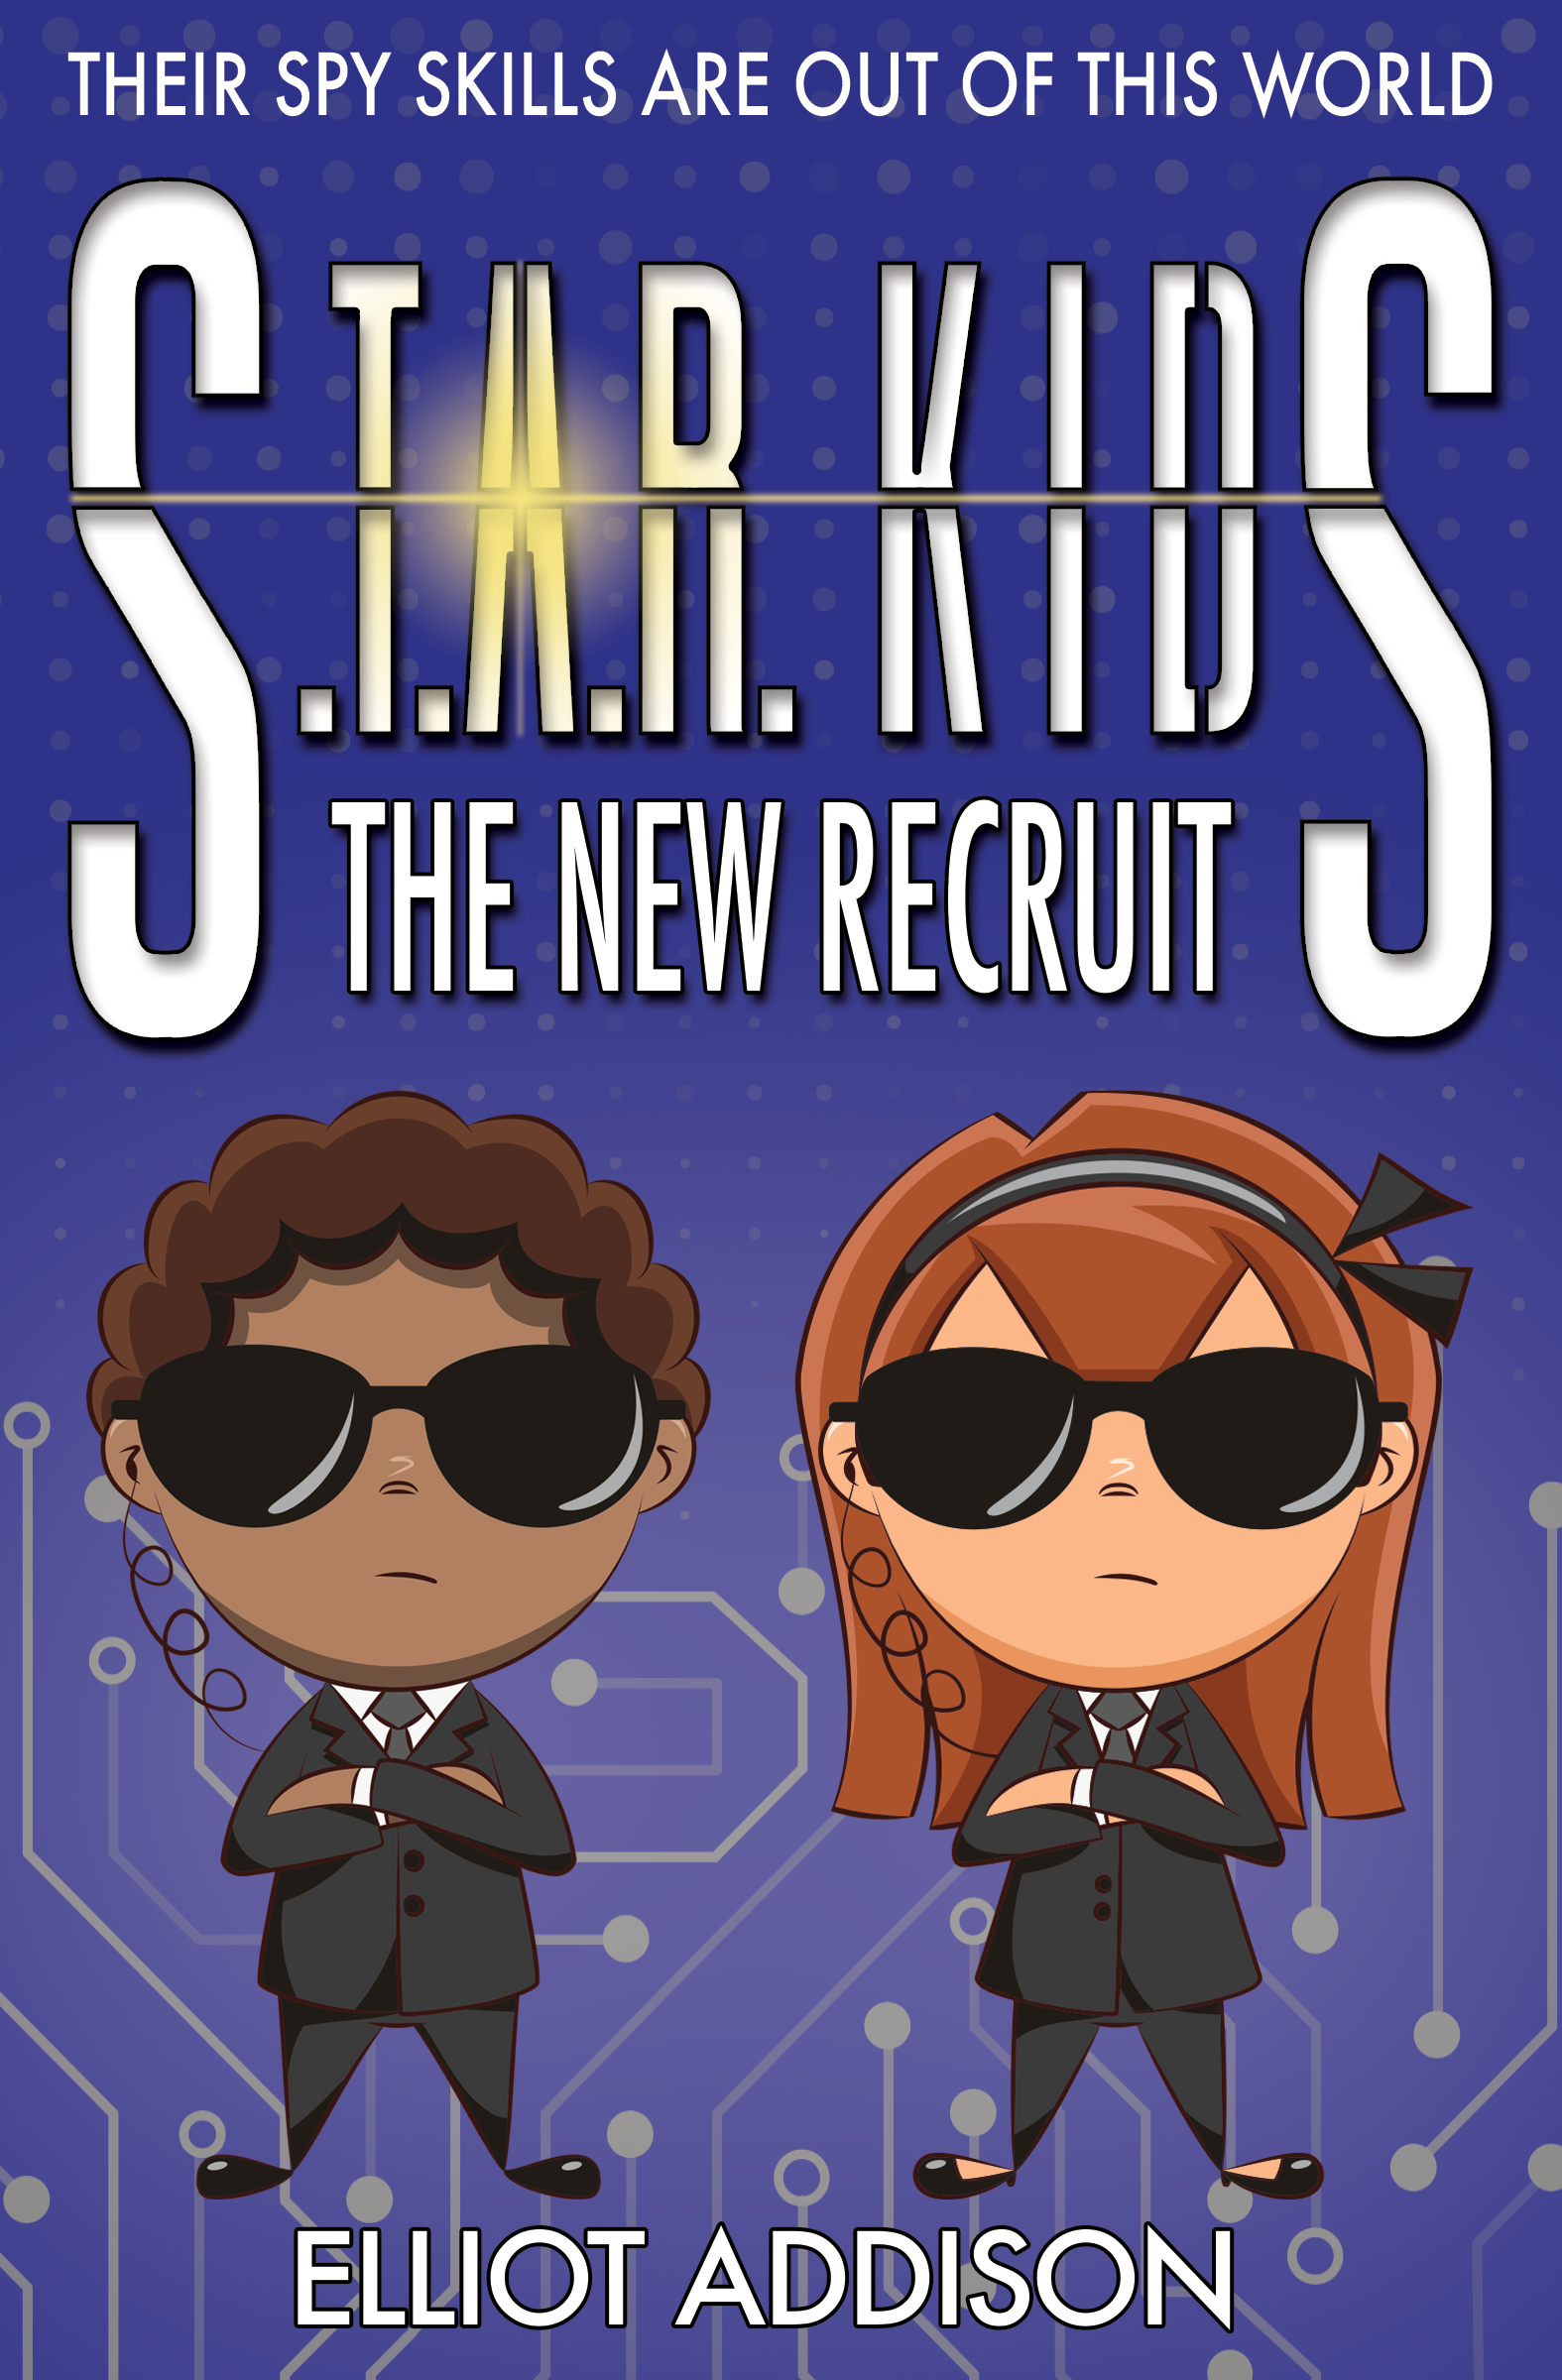 S.T.A.R. Kids: The New Recruit